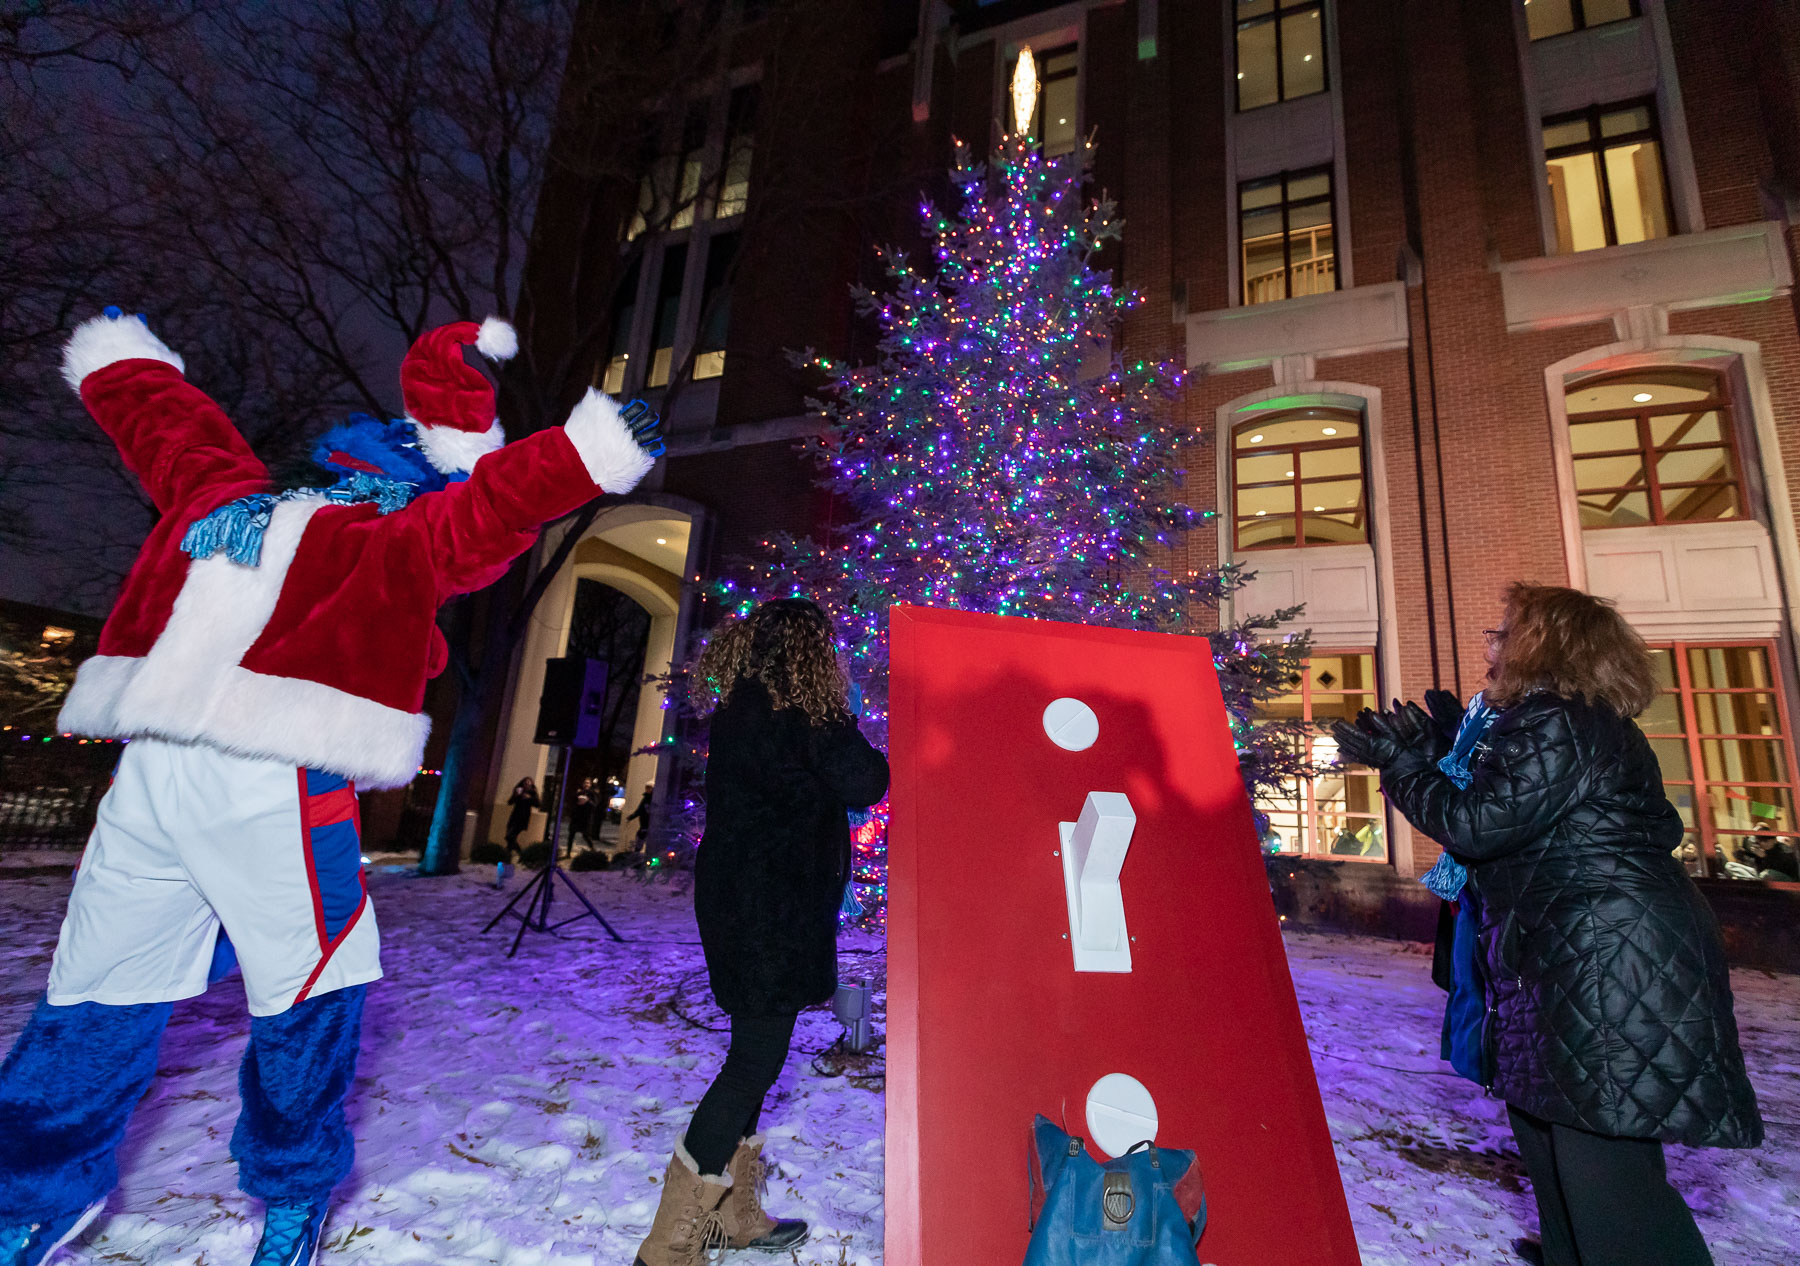 A flip of the switch and DePaul’s beacon is lit to guide students back from their holiday break in January. (DePaul University/Jeff Carrion)